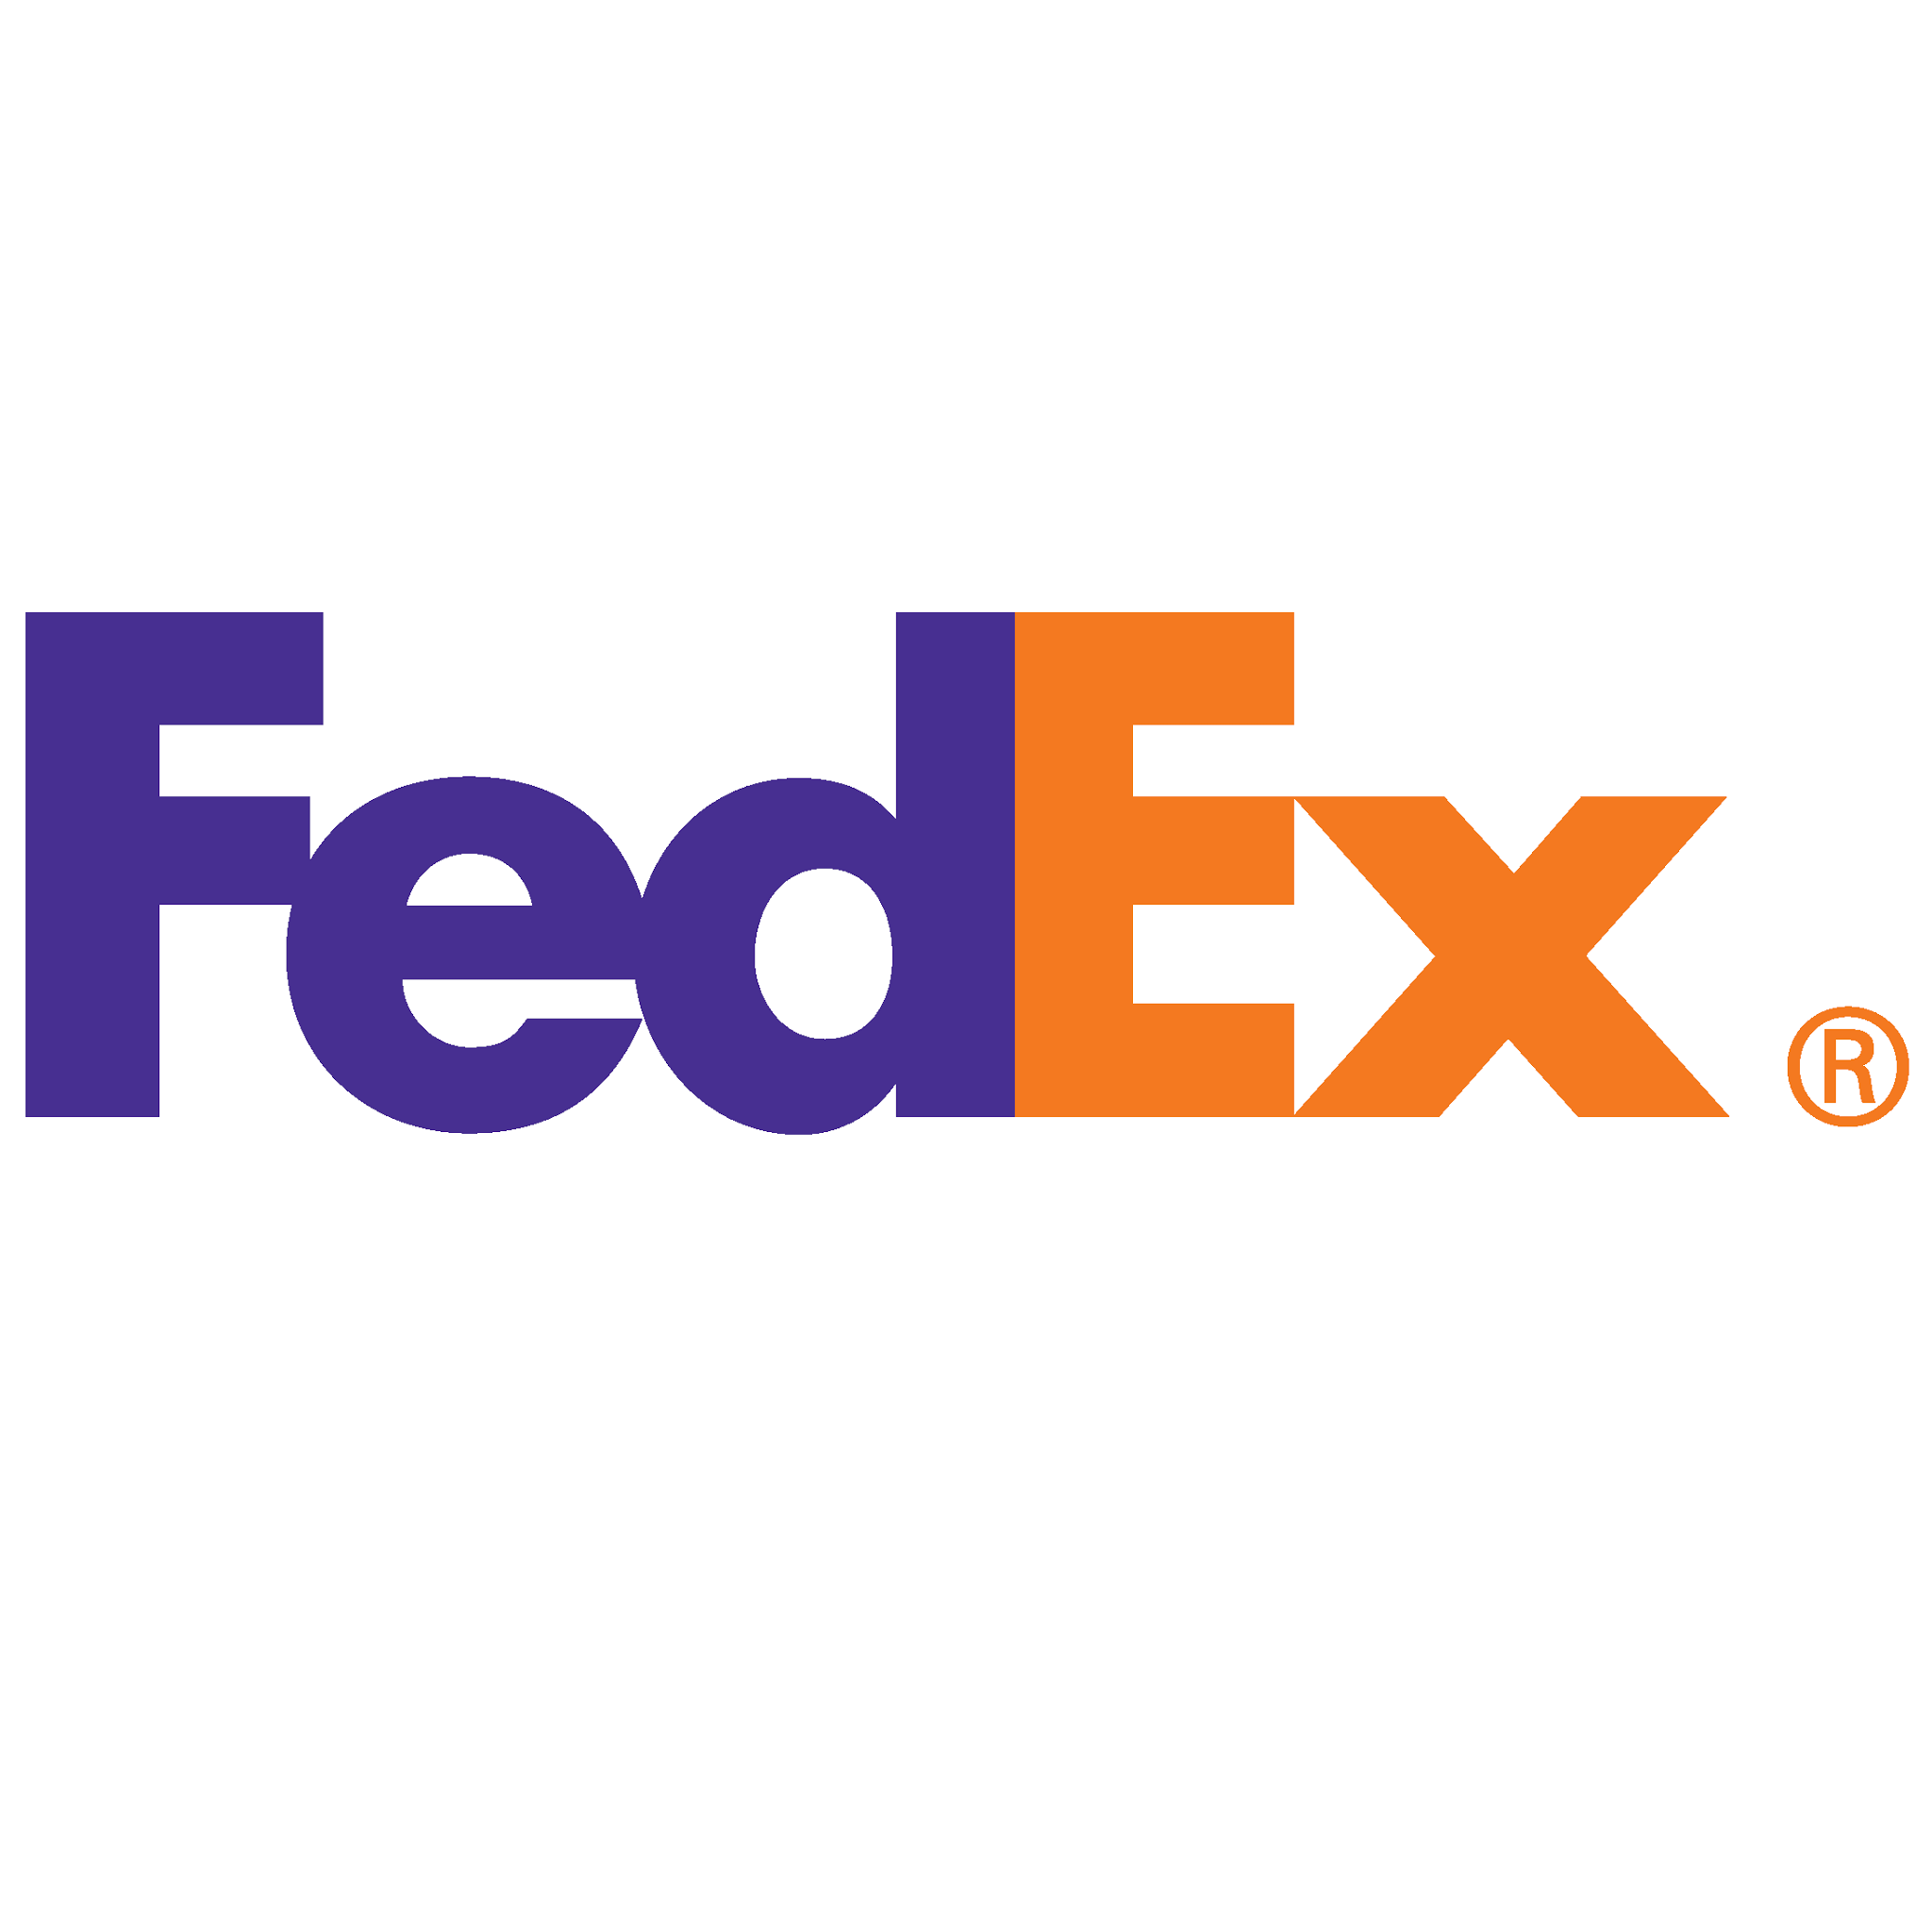 FedEx logo - Univers Extended is a good font choice for a clean and light logo design - Image